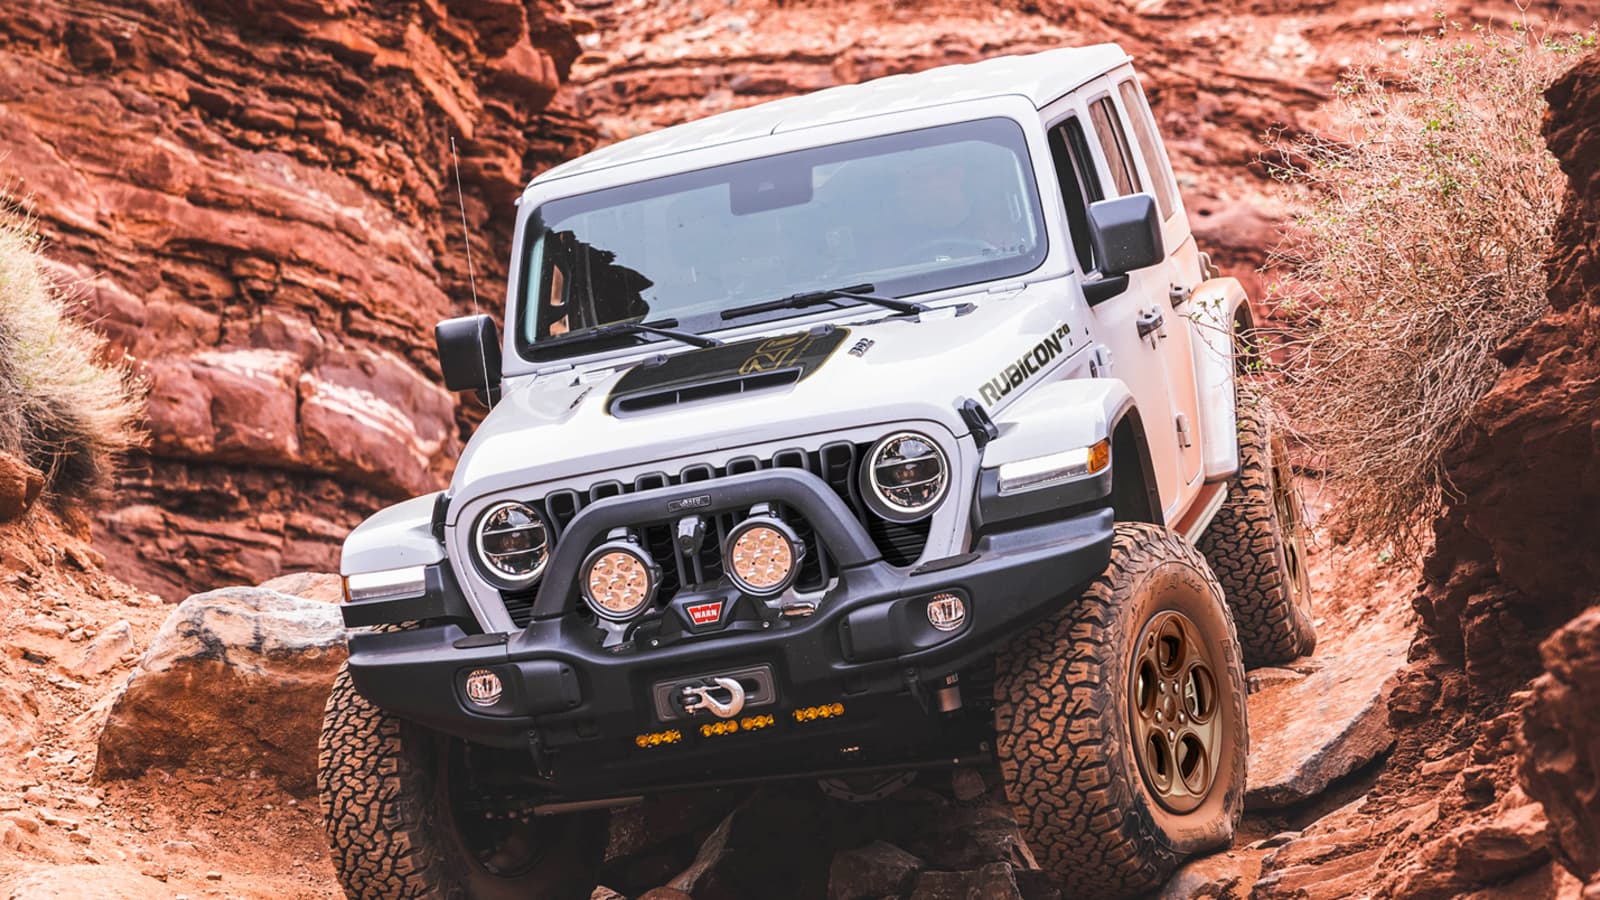 Jeep Wrangler SUV at $115,000 is most expensive ever